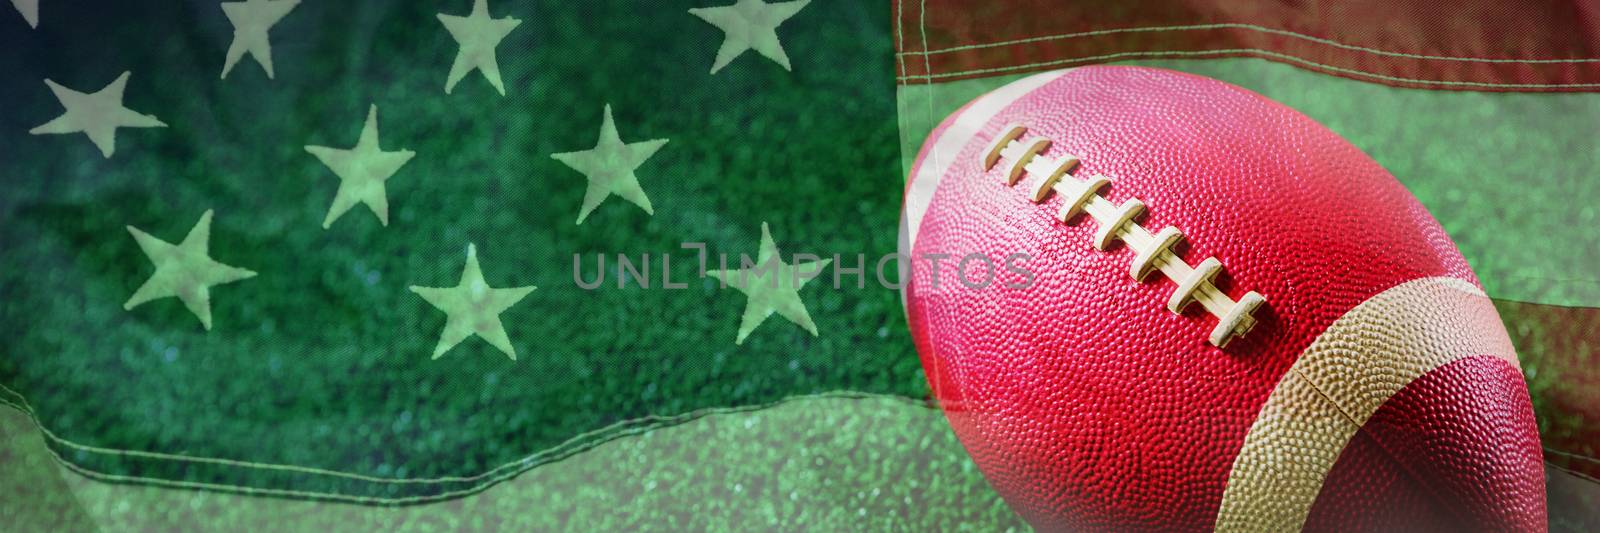 Close-up of American football against full frame of american flag